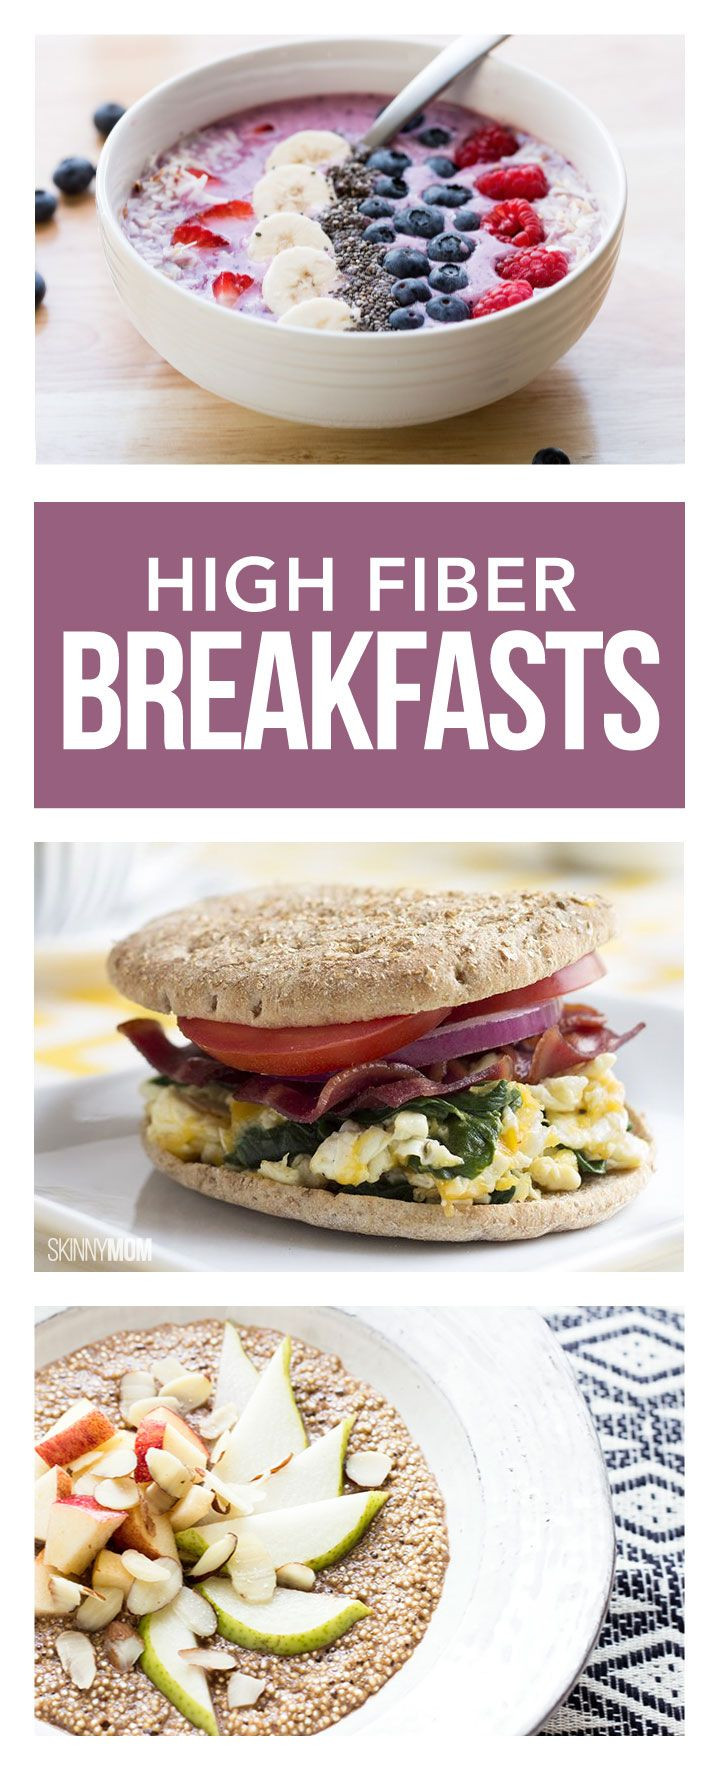 High Fiber Breakfast Recipes
 7 High Fiber Breakfasts To Power You Through To Lunch